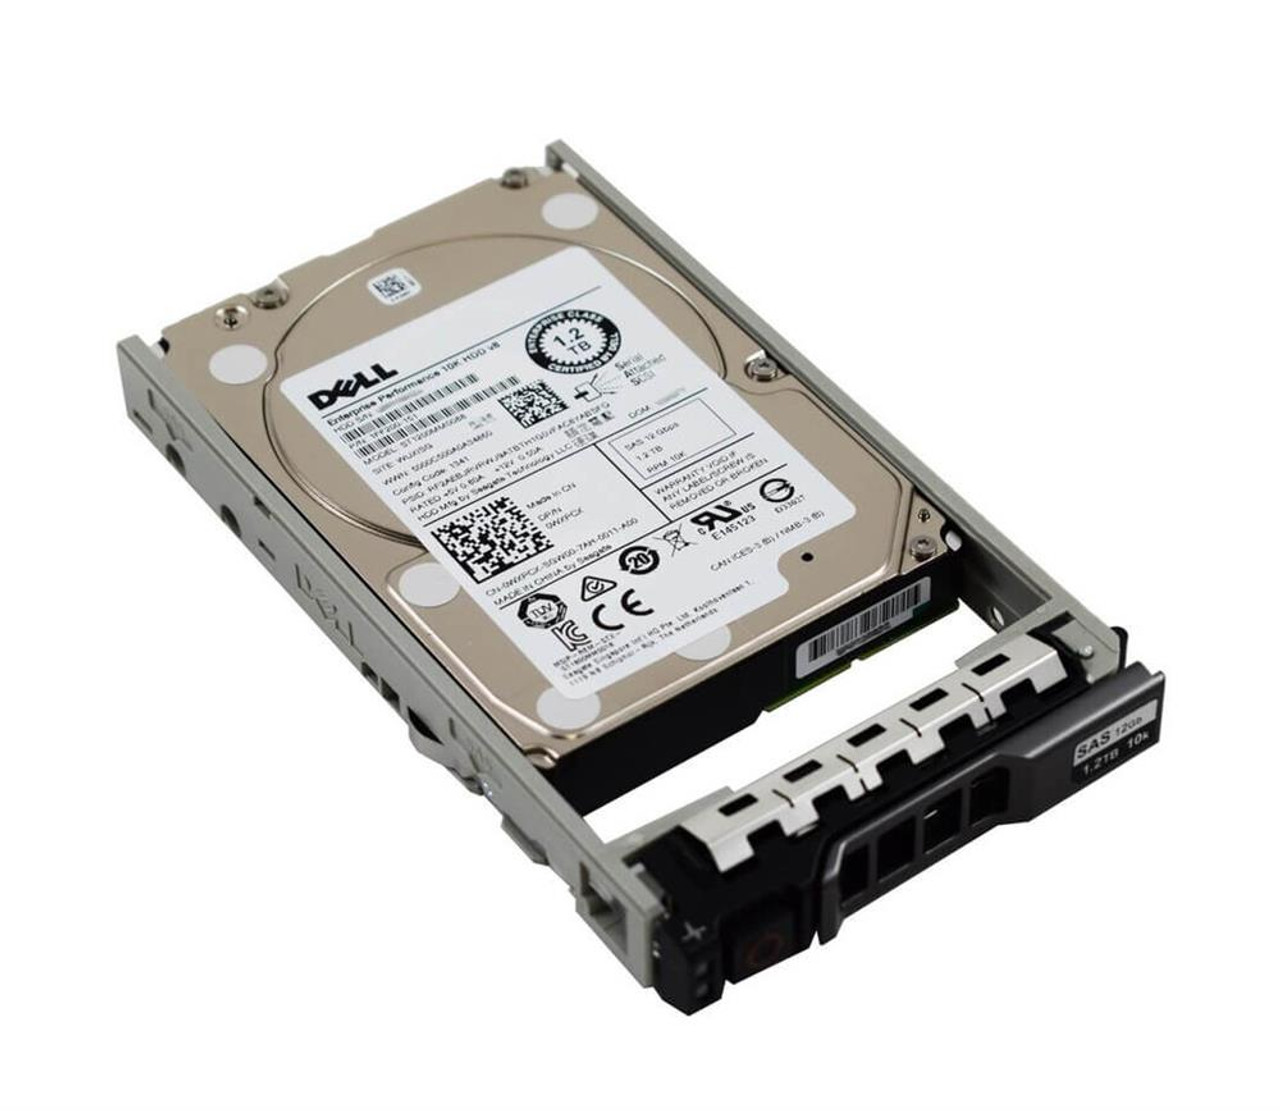 99X7T Dell 1.2TB 10000RPM SAS 12Gbps 2.5-inch Internal Hard Drive with Tray for PowerEdge Server G13